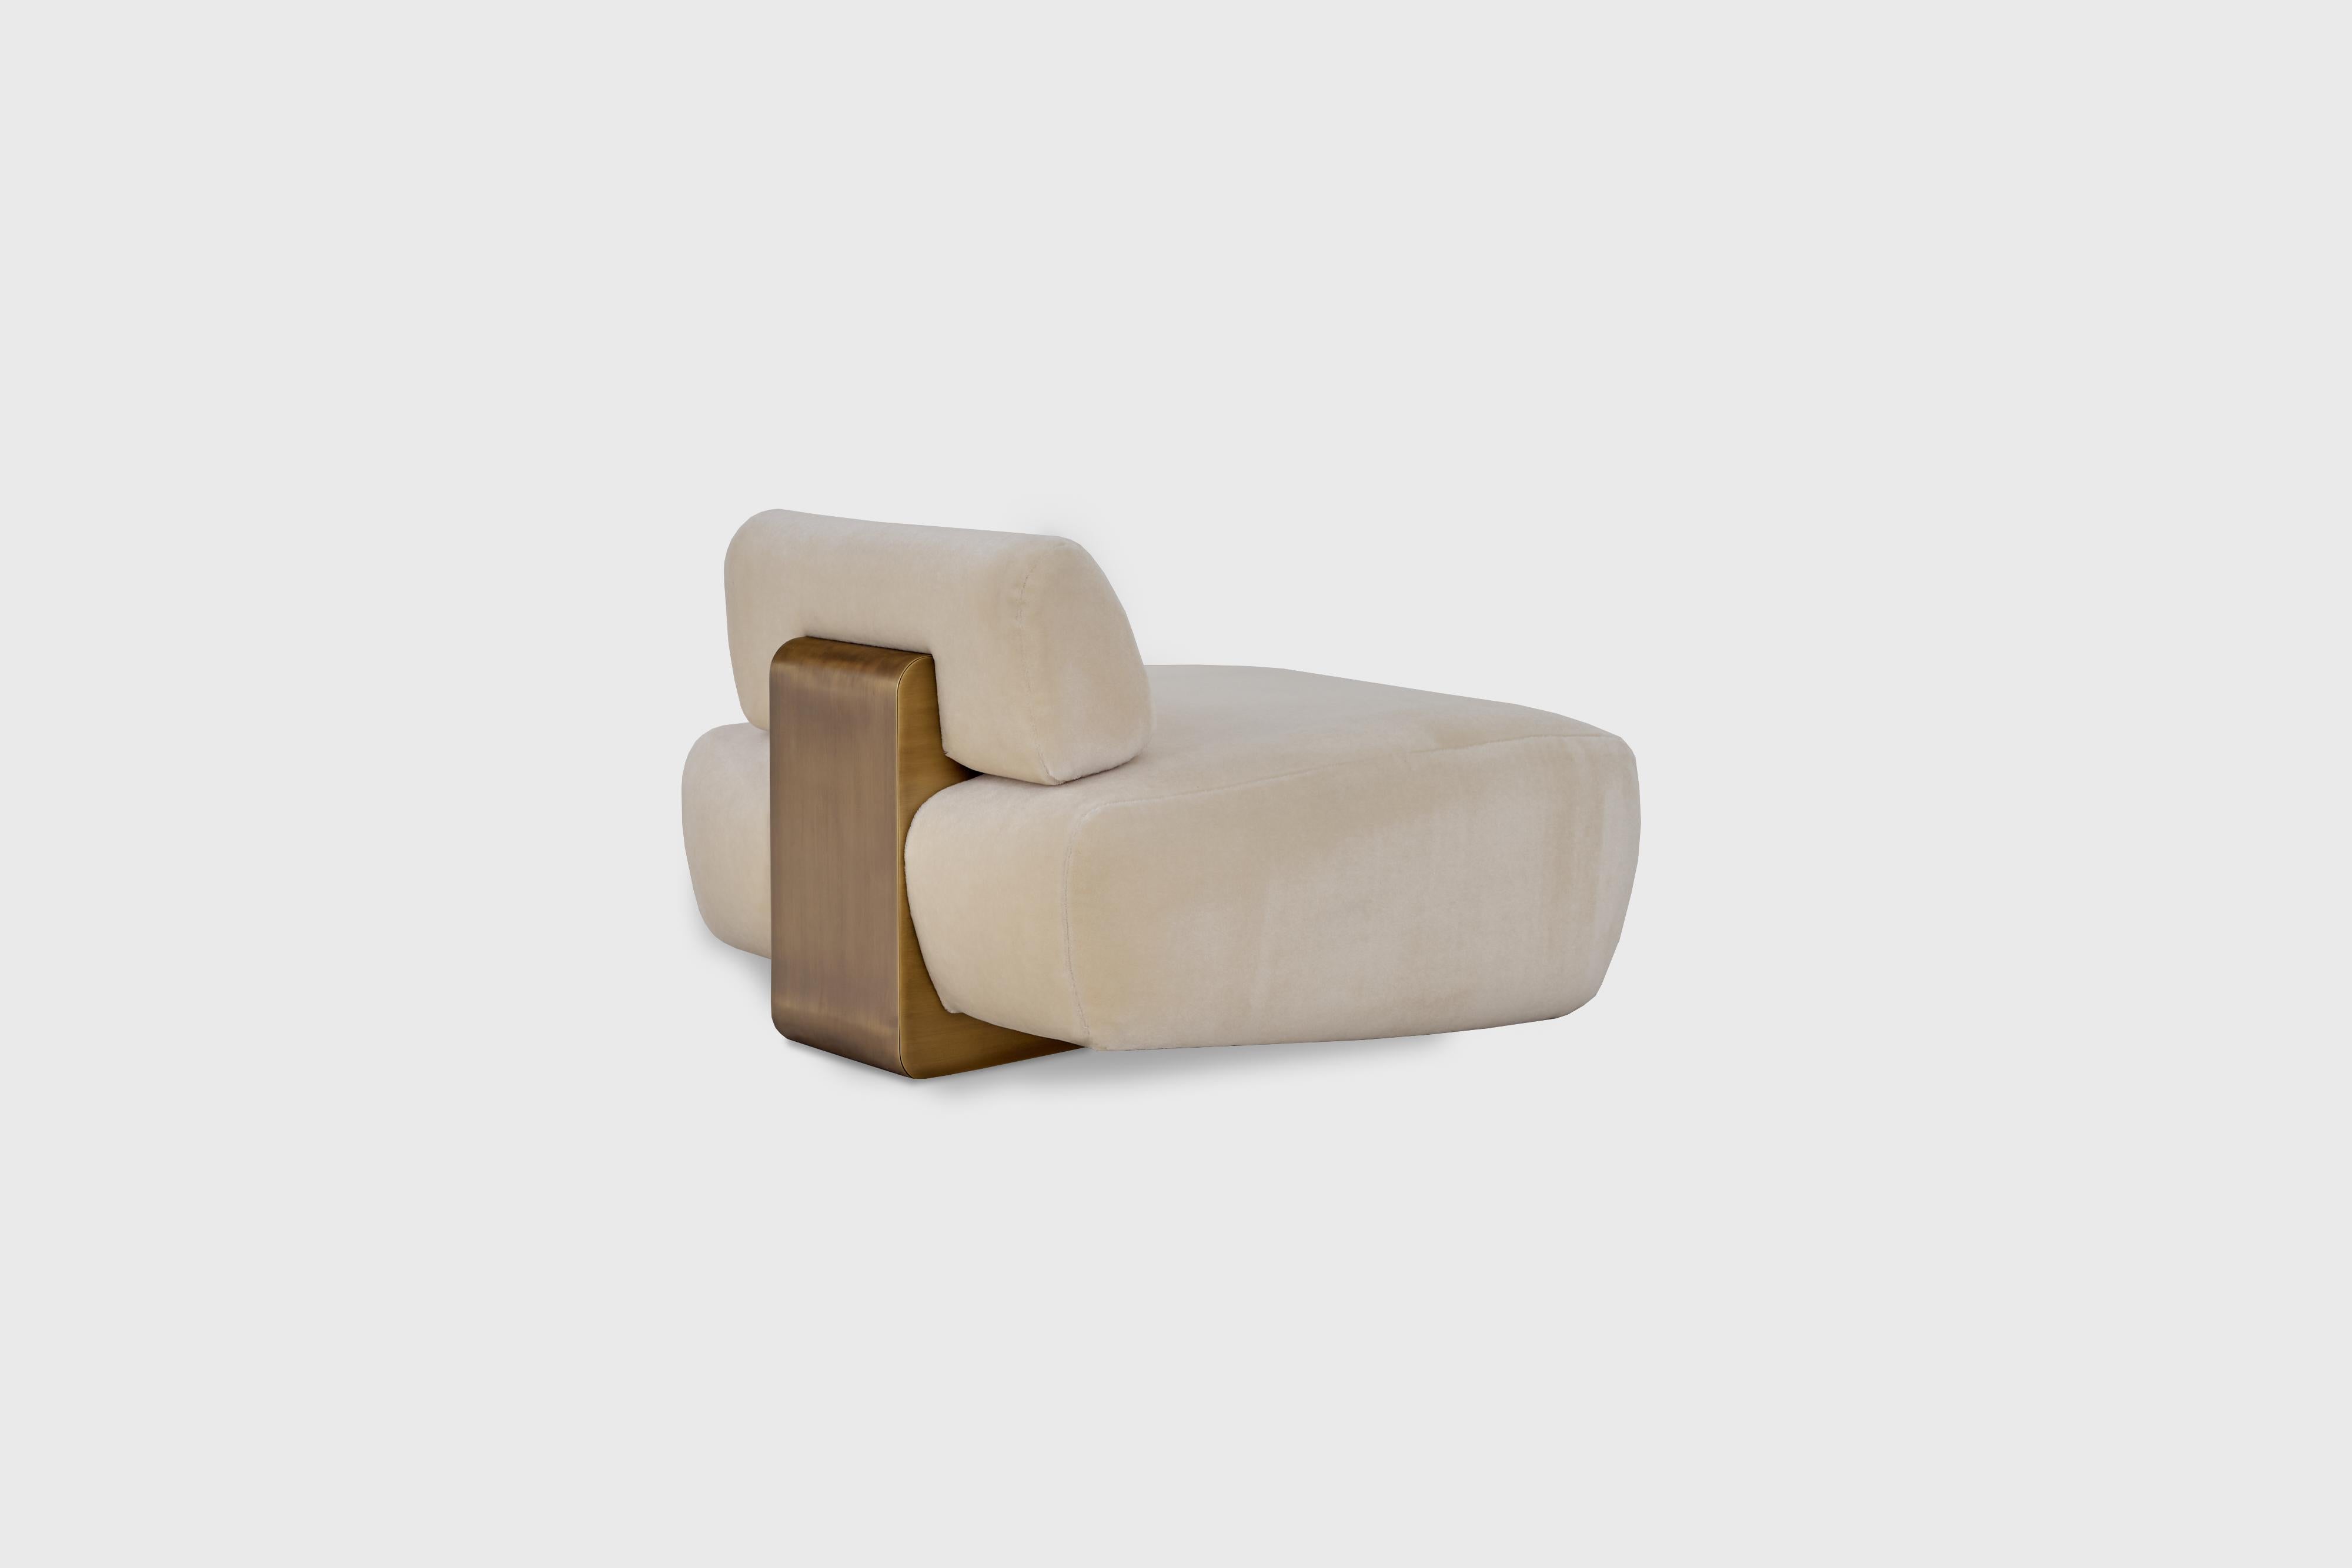 Margot lounge chair by Atra Design.
Dimensions: D 60 x W 94 x H 82 cm.
Materials: Elitis mohair fabric, aged brass.

Atra Design
We are Atra, a furniture brand produced by Atra form a mexico city–based high end production facility that also houses